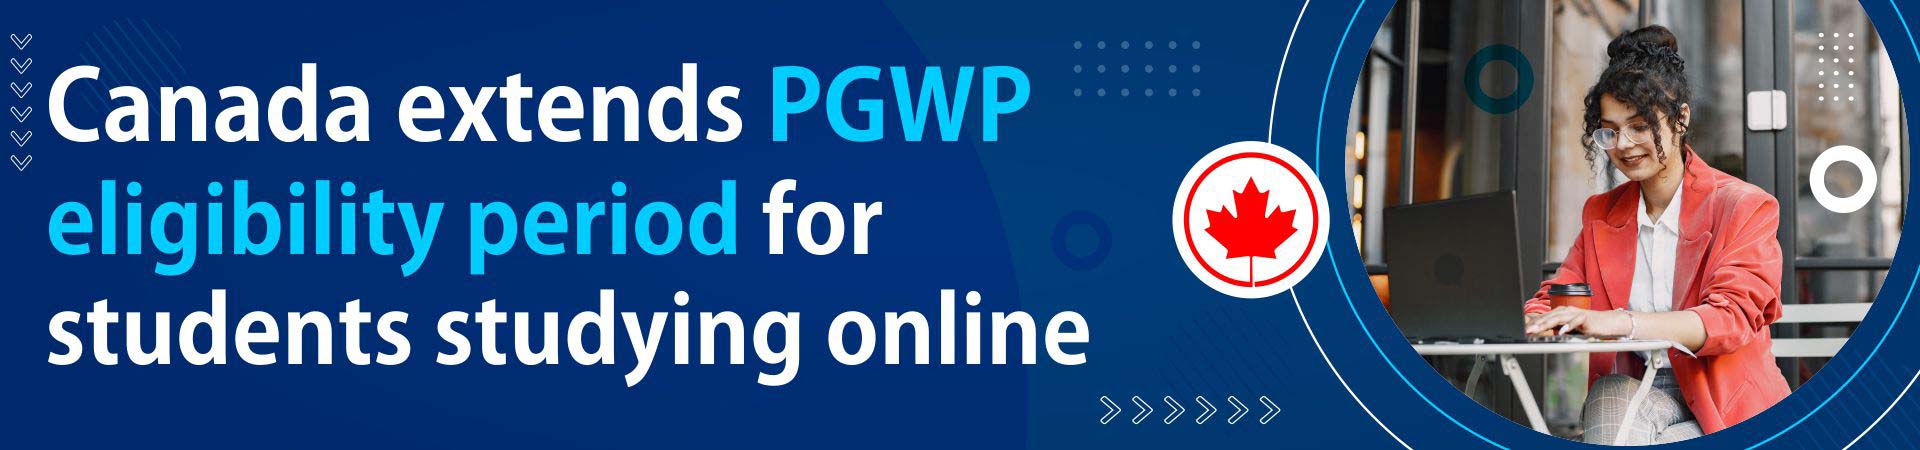 Canada extends PGWP eligibility period for students studying online